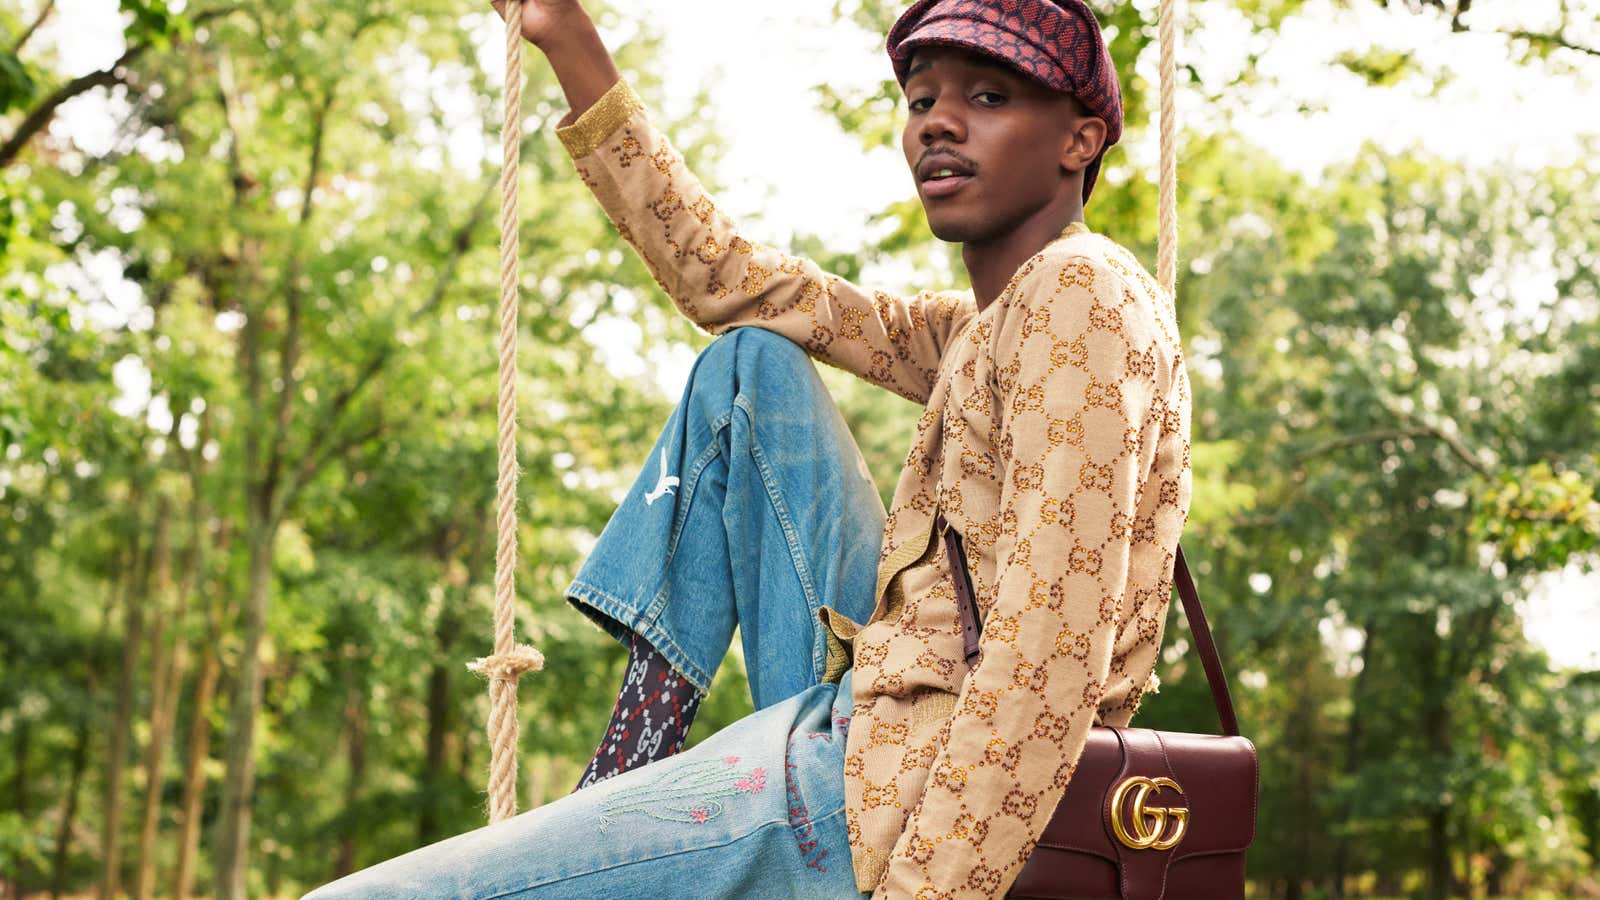 A campaign image from the new partnership between Gucci and The RealReal.